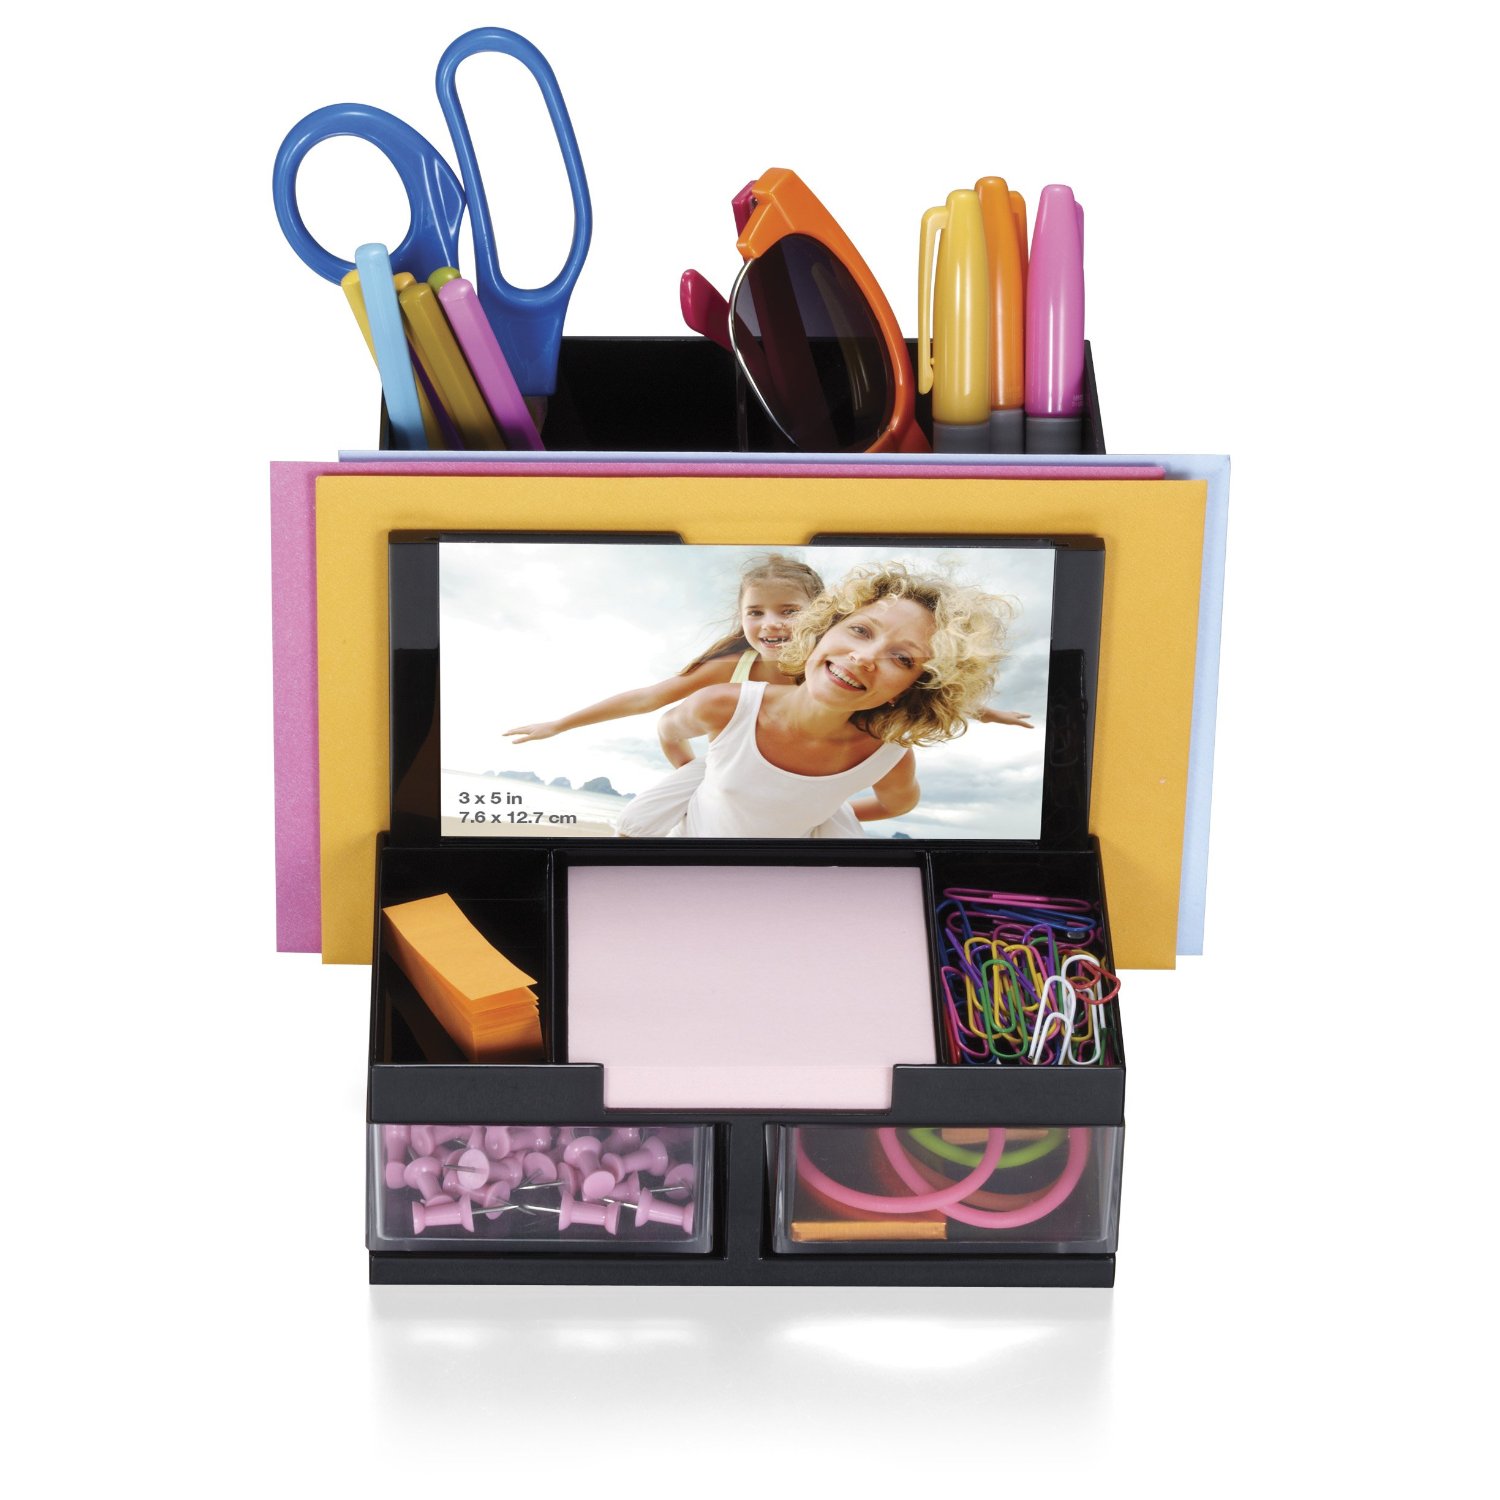 Seven compartments plus slots for 3 x 5 inches photo and note/envelope holder. The stepped pencil cup is great for pens, scissors, glue sticks or whatever you need to stand upright.